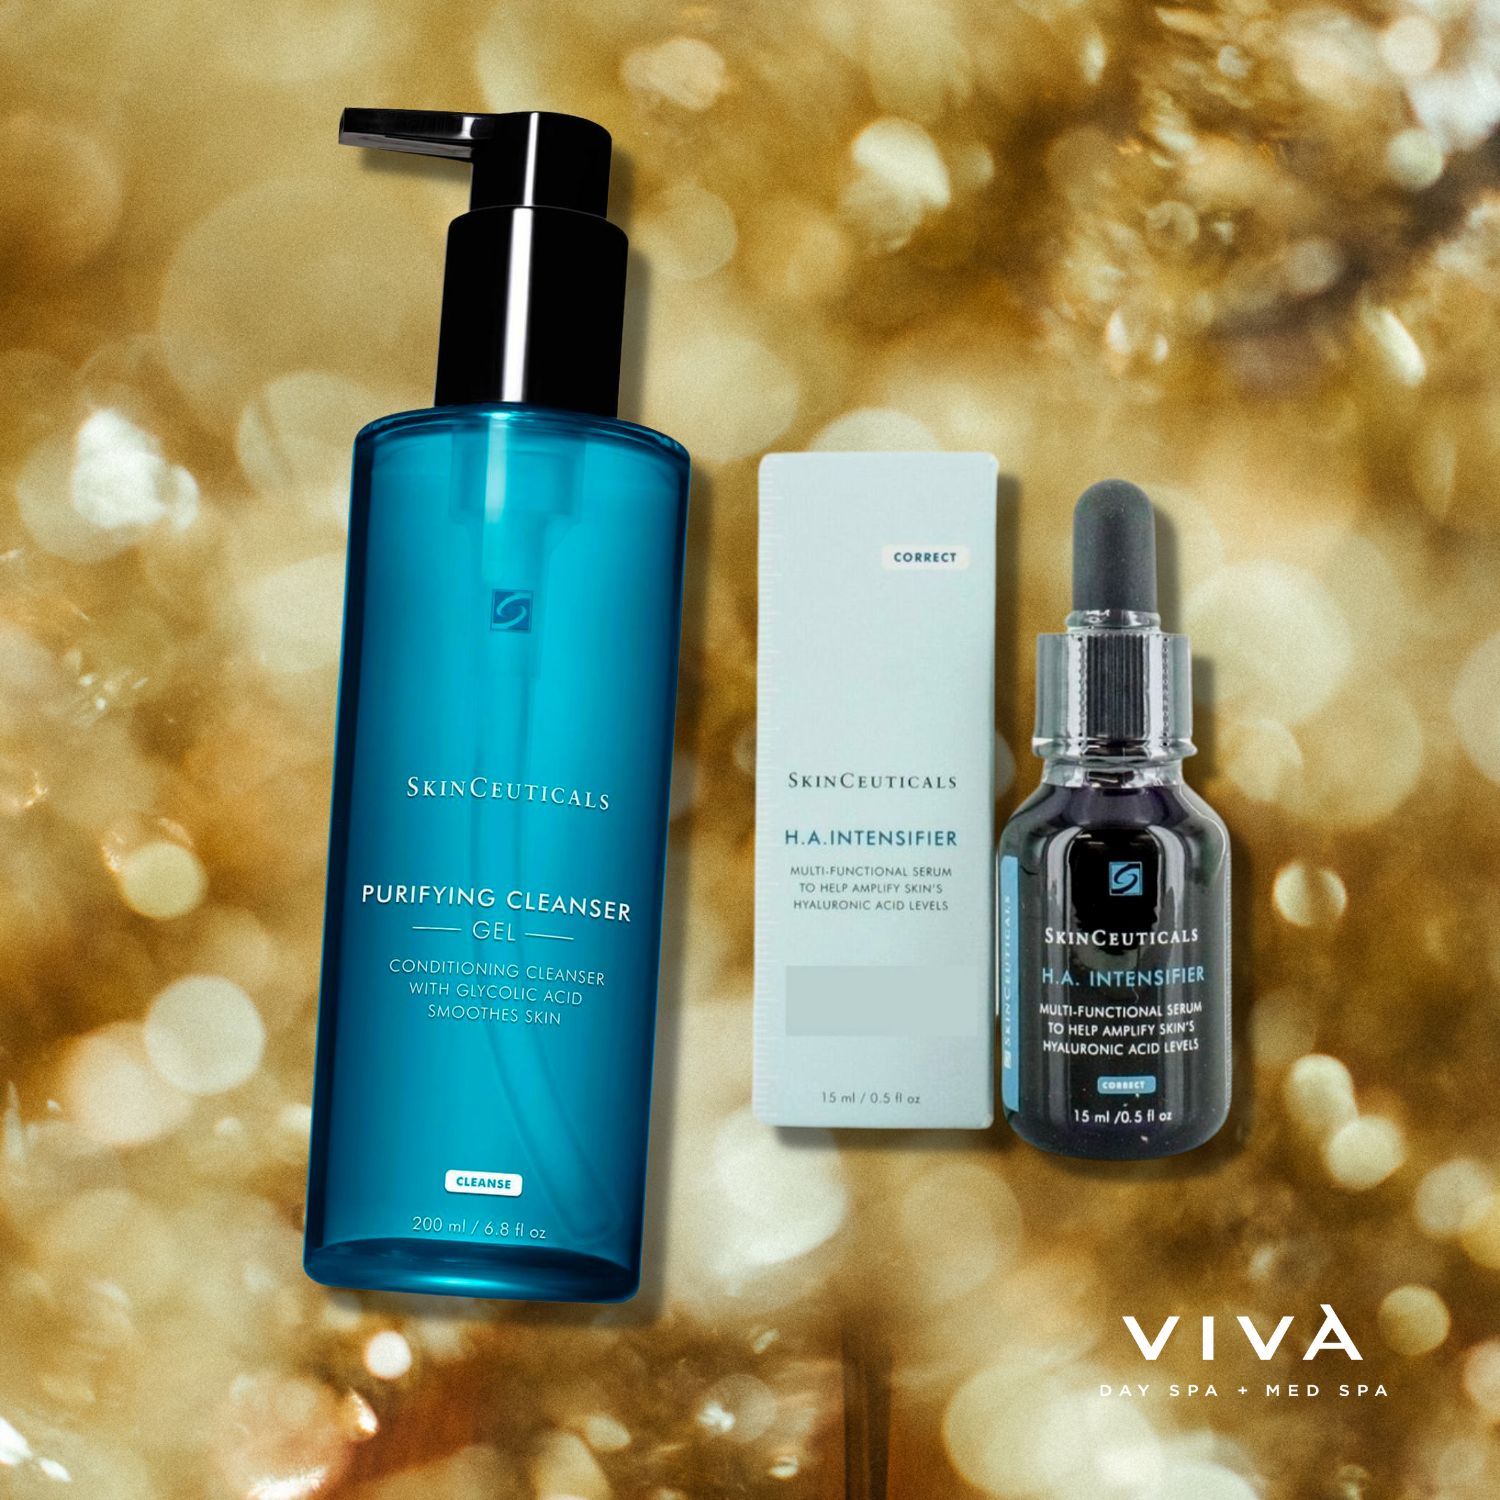 SkinCeuticals Gift with Purchase Offer at Viva Day Spa + Med Spa